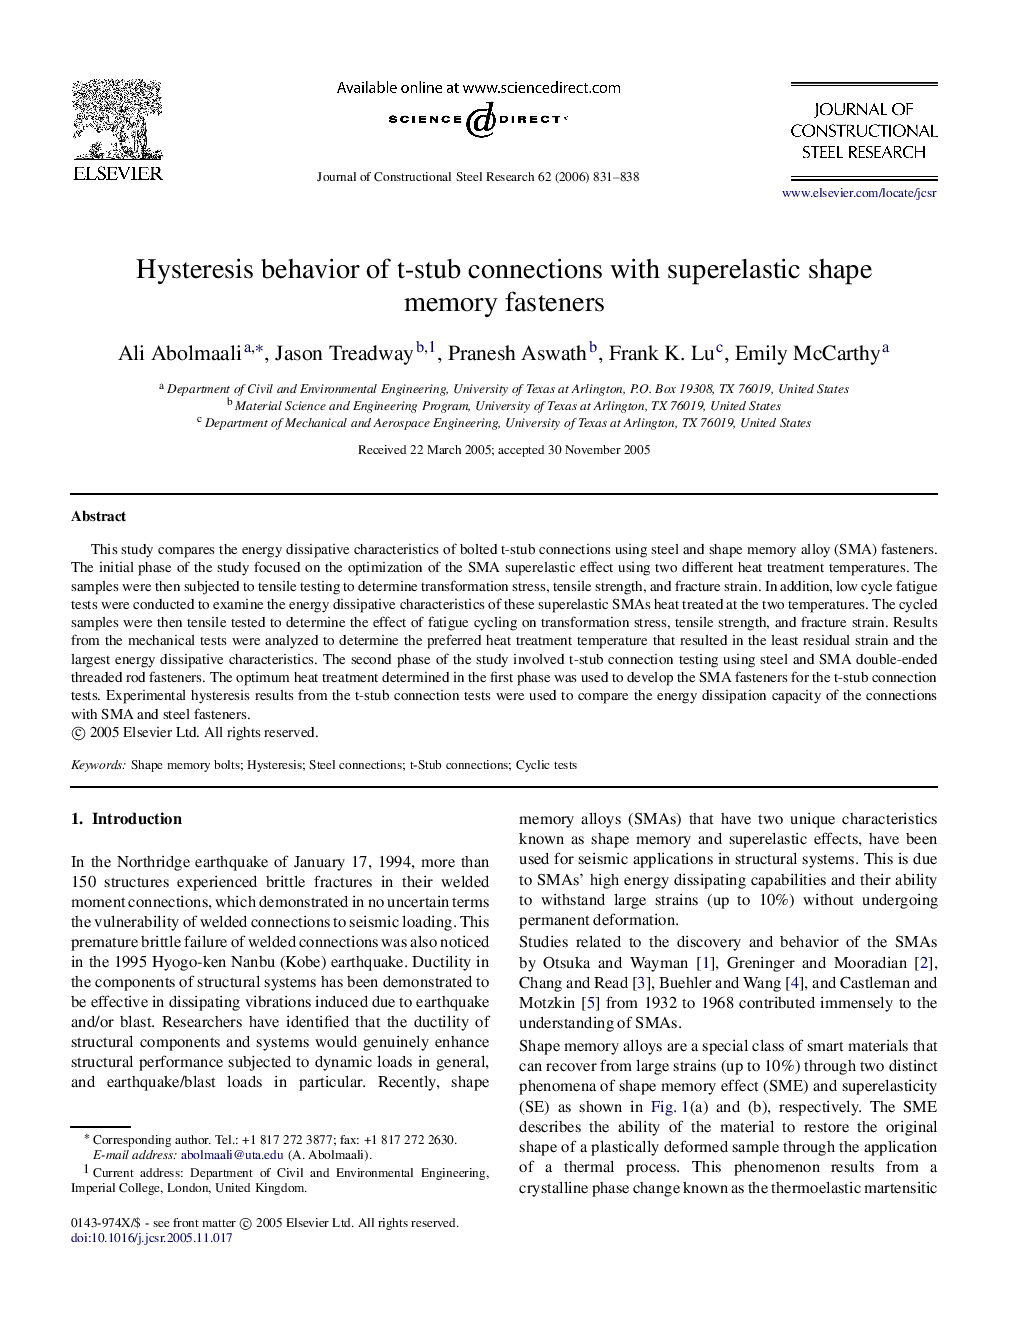 Hysteresis behavior of t-stub connections with superelastic shape memory fasteners